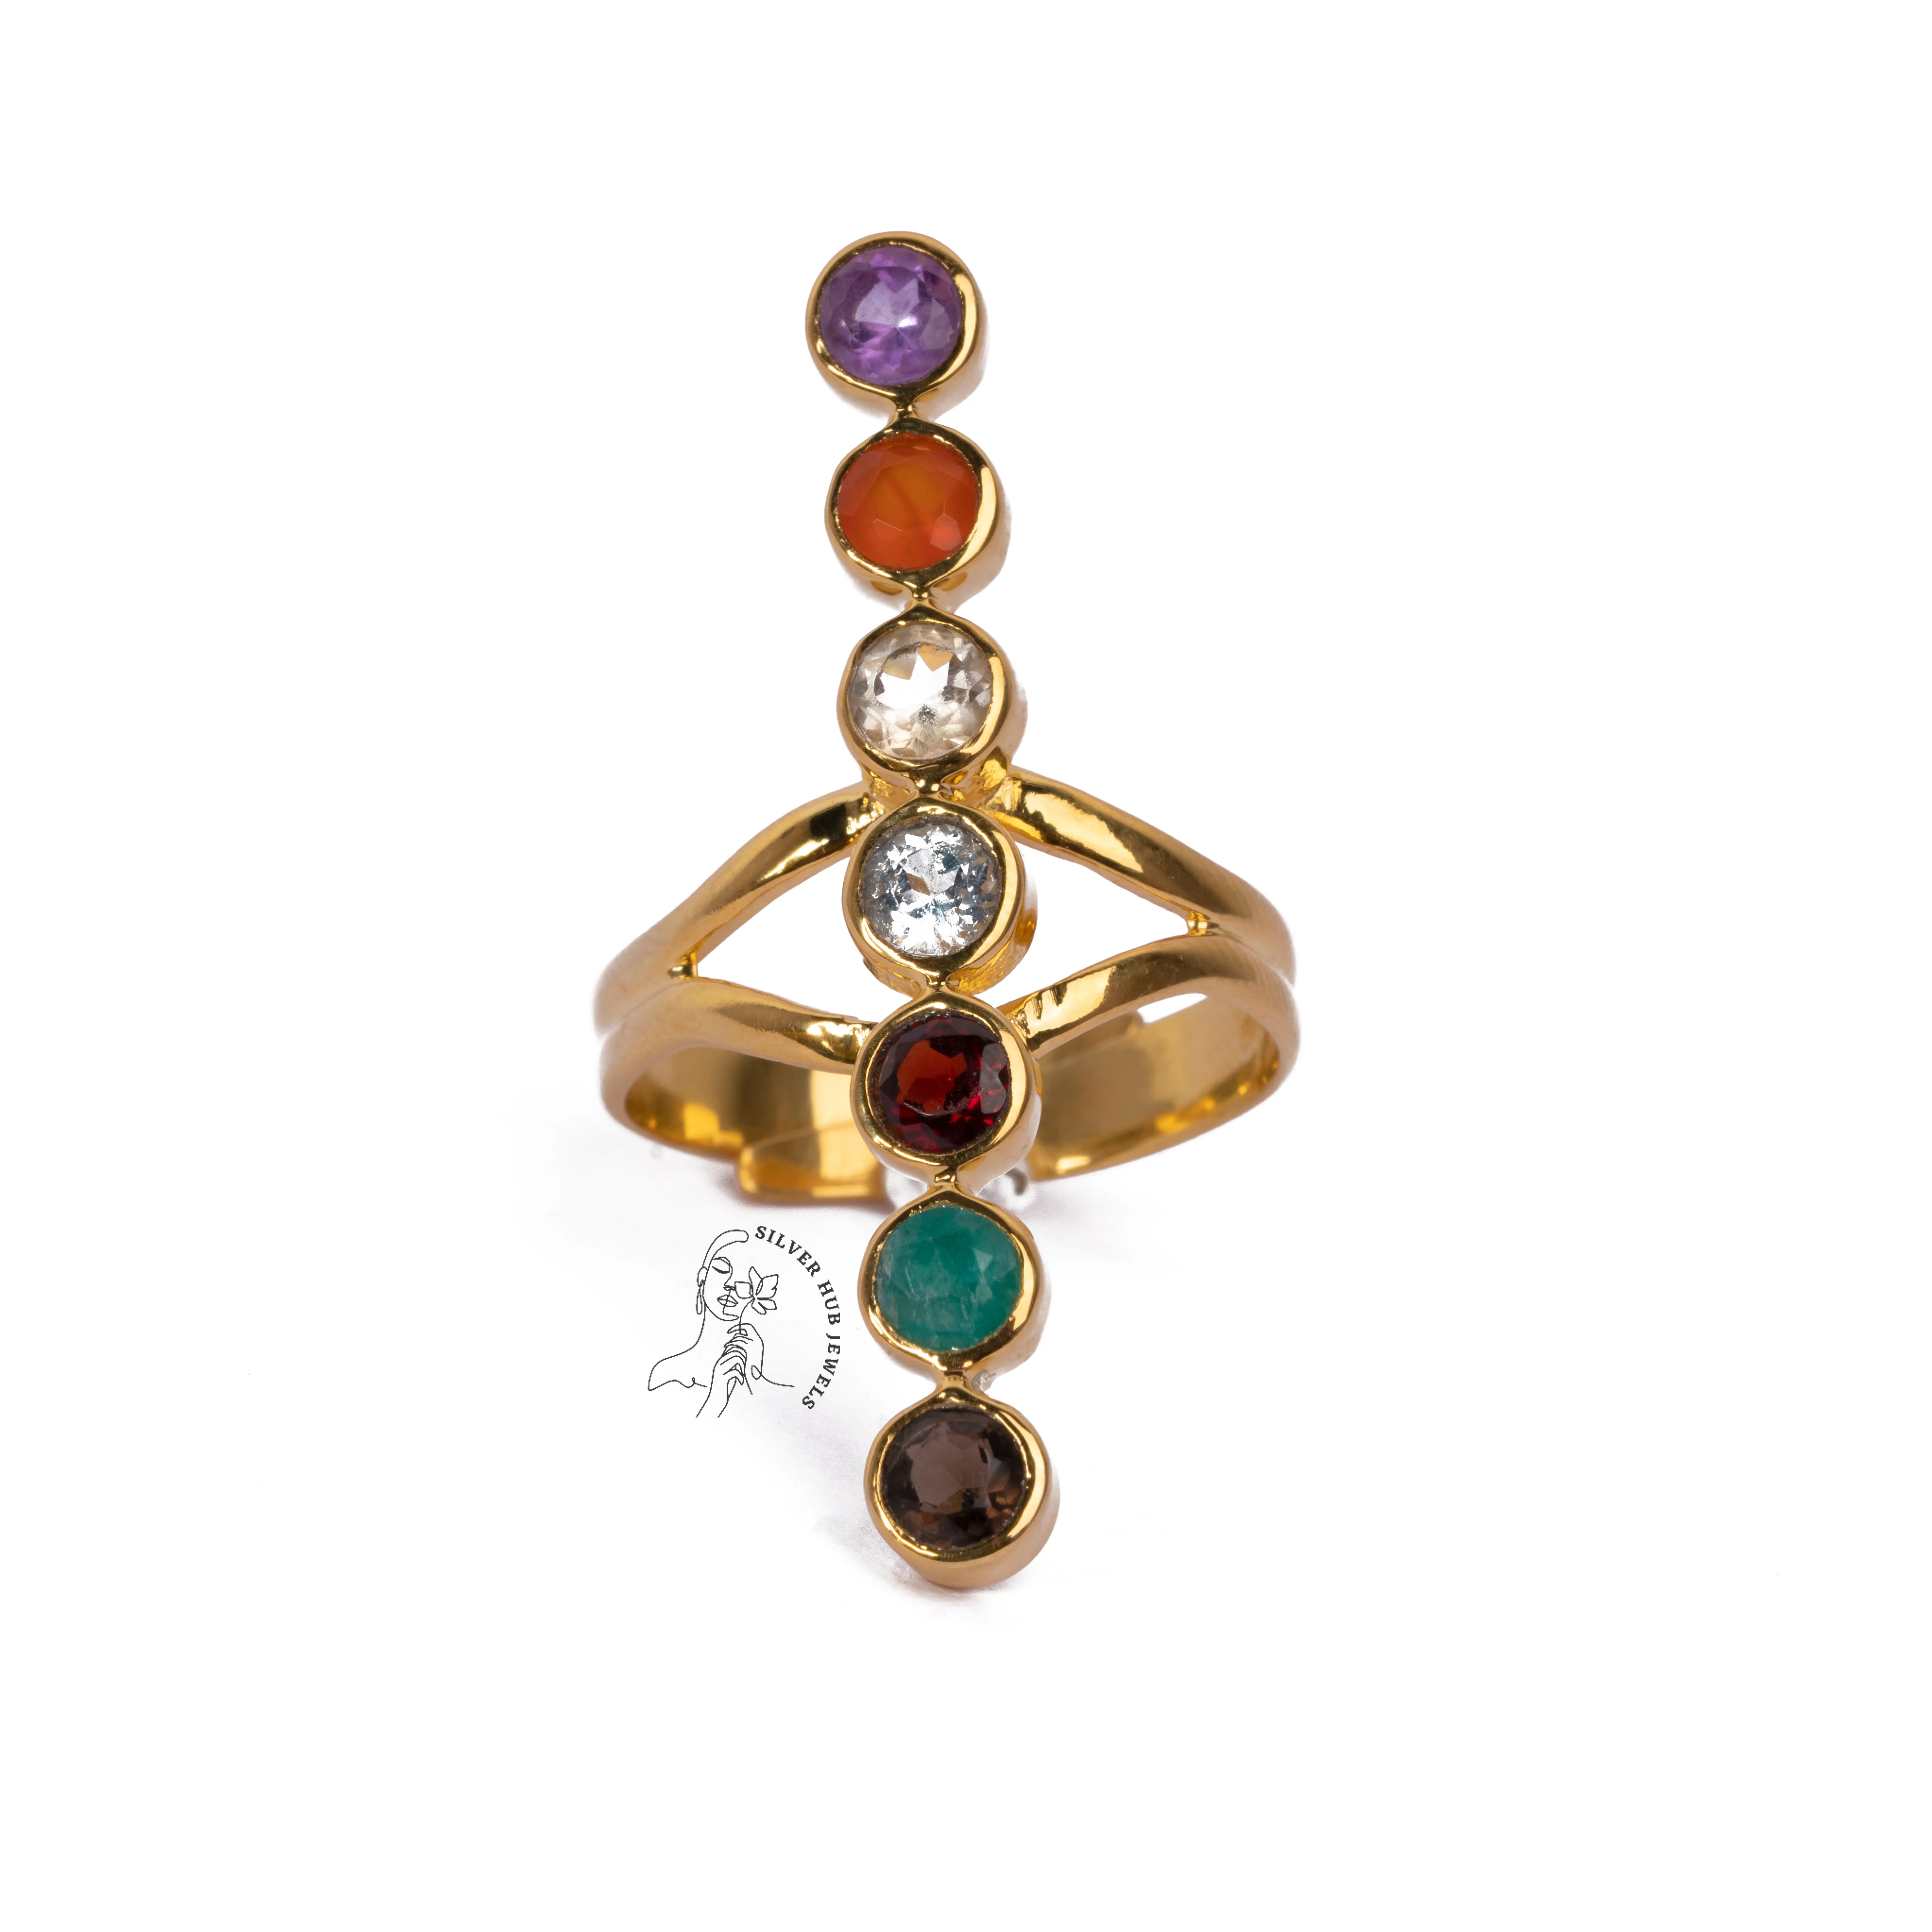 7 Chakra Stone Ring 18k Gold Plated Round Cut Stones Finger Fine Jewelry Yoga Energy Reiki Balancing 925 Sterling Silver Rings